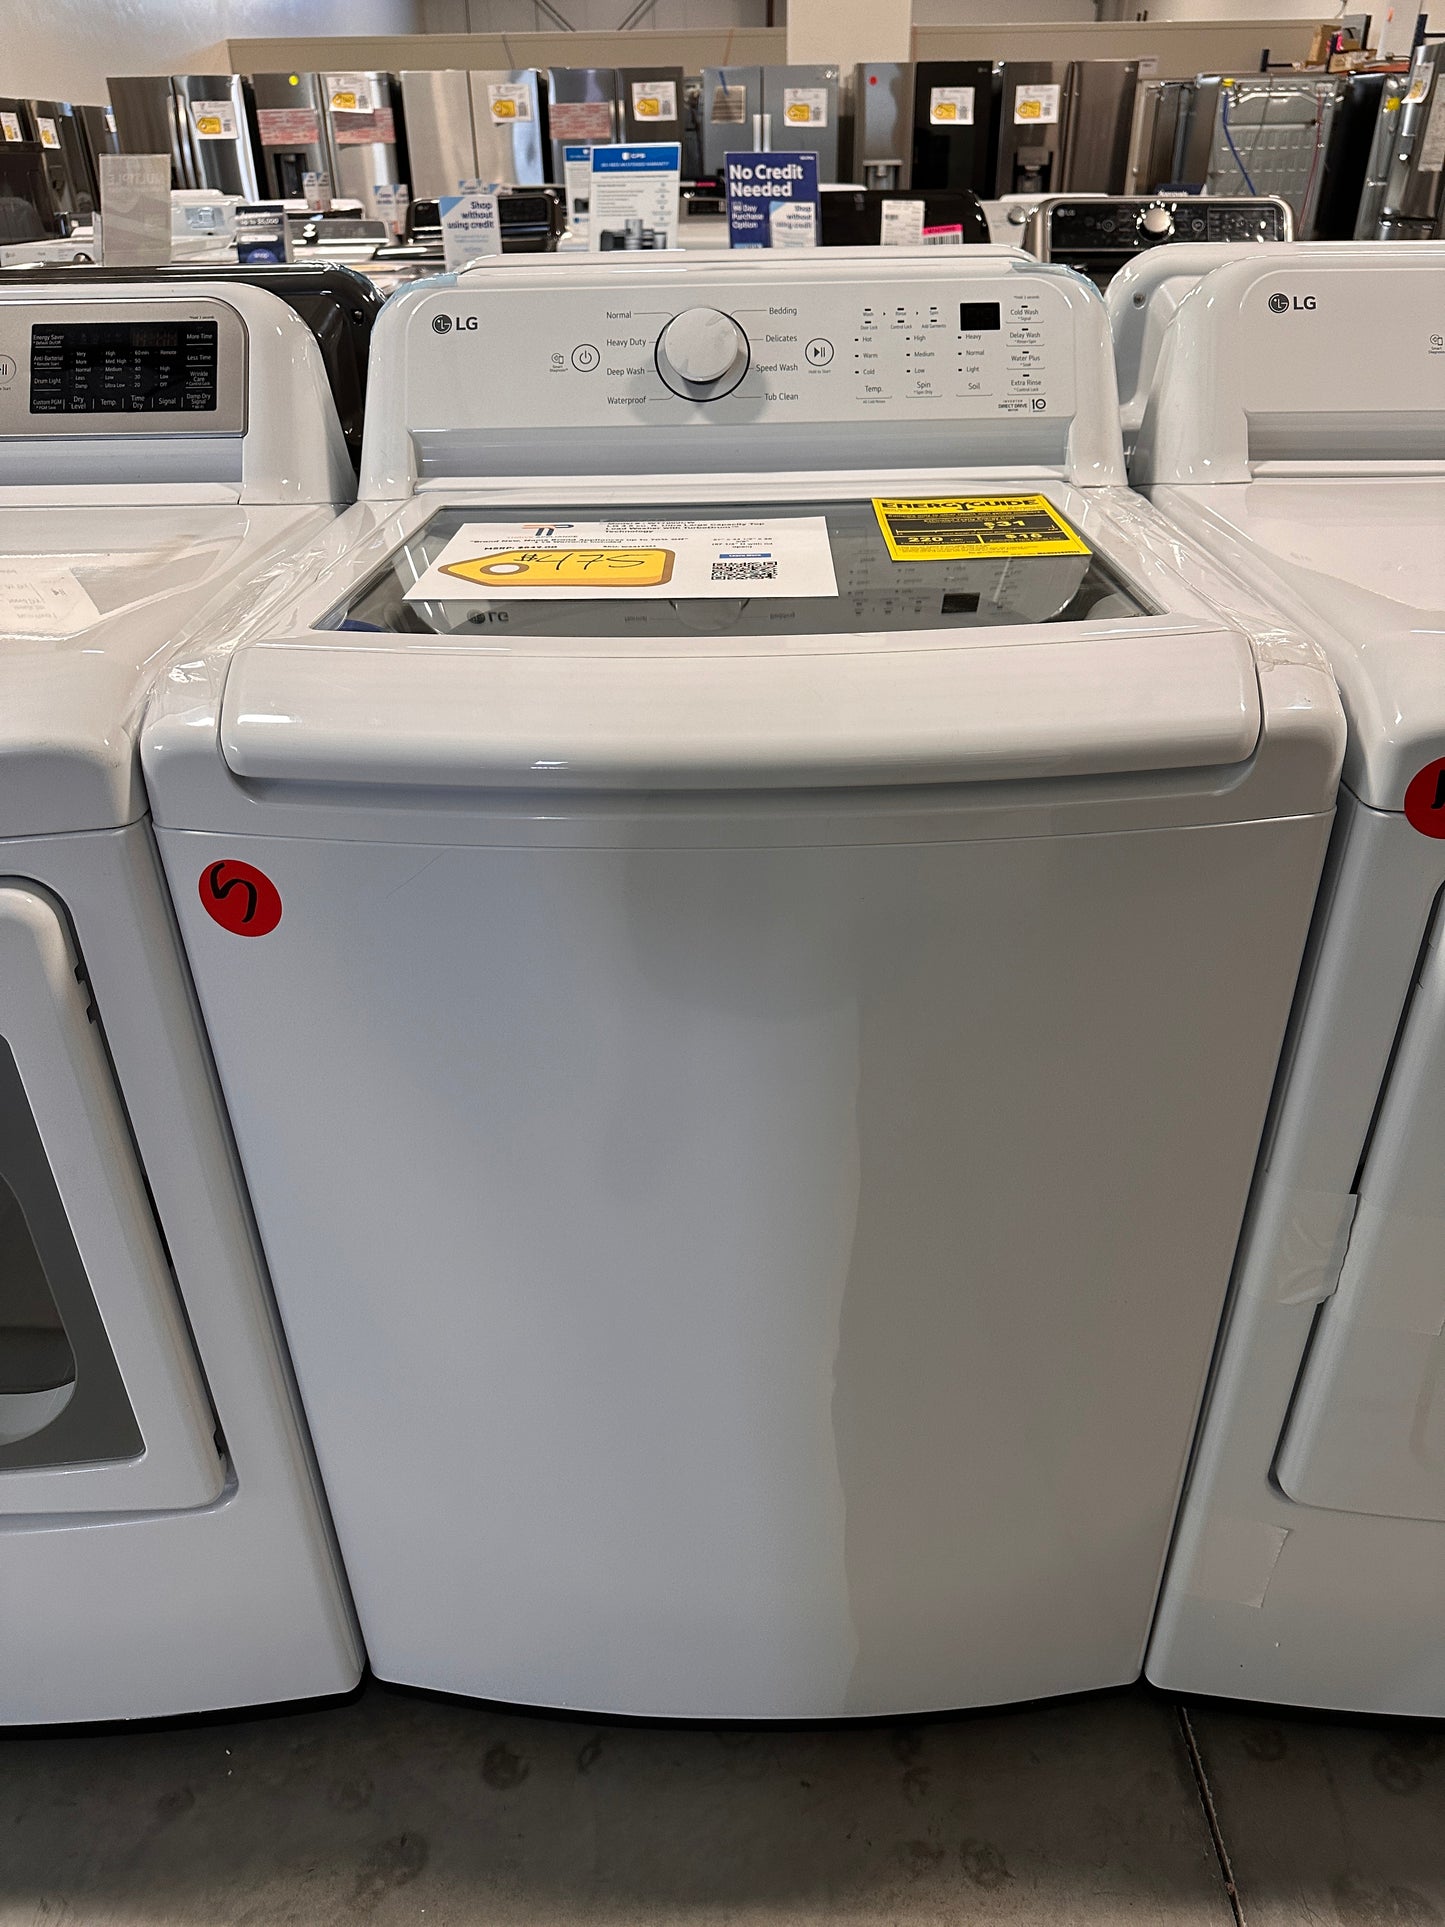 TOP LOAD WASHER with TURBODRUM TECHNOLOGY - NEW - MODEL: WT7000CW WAS13321